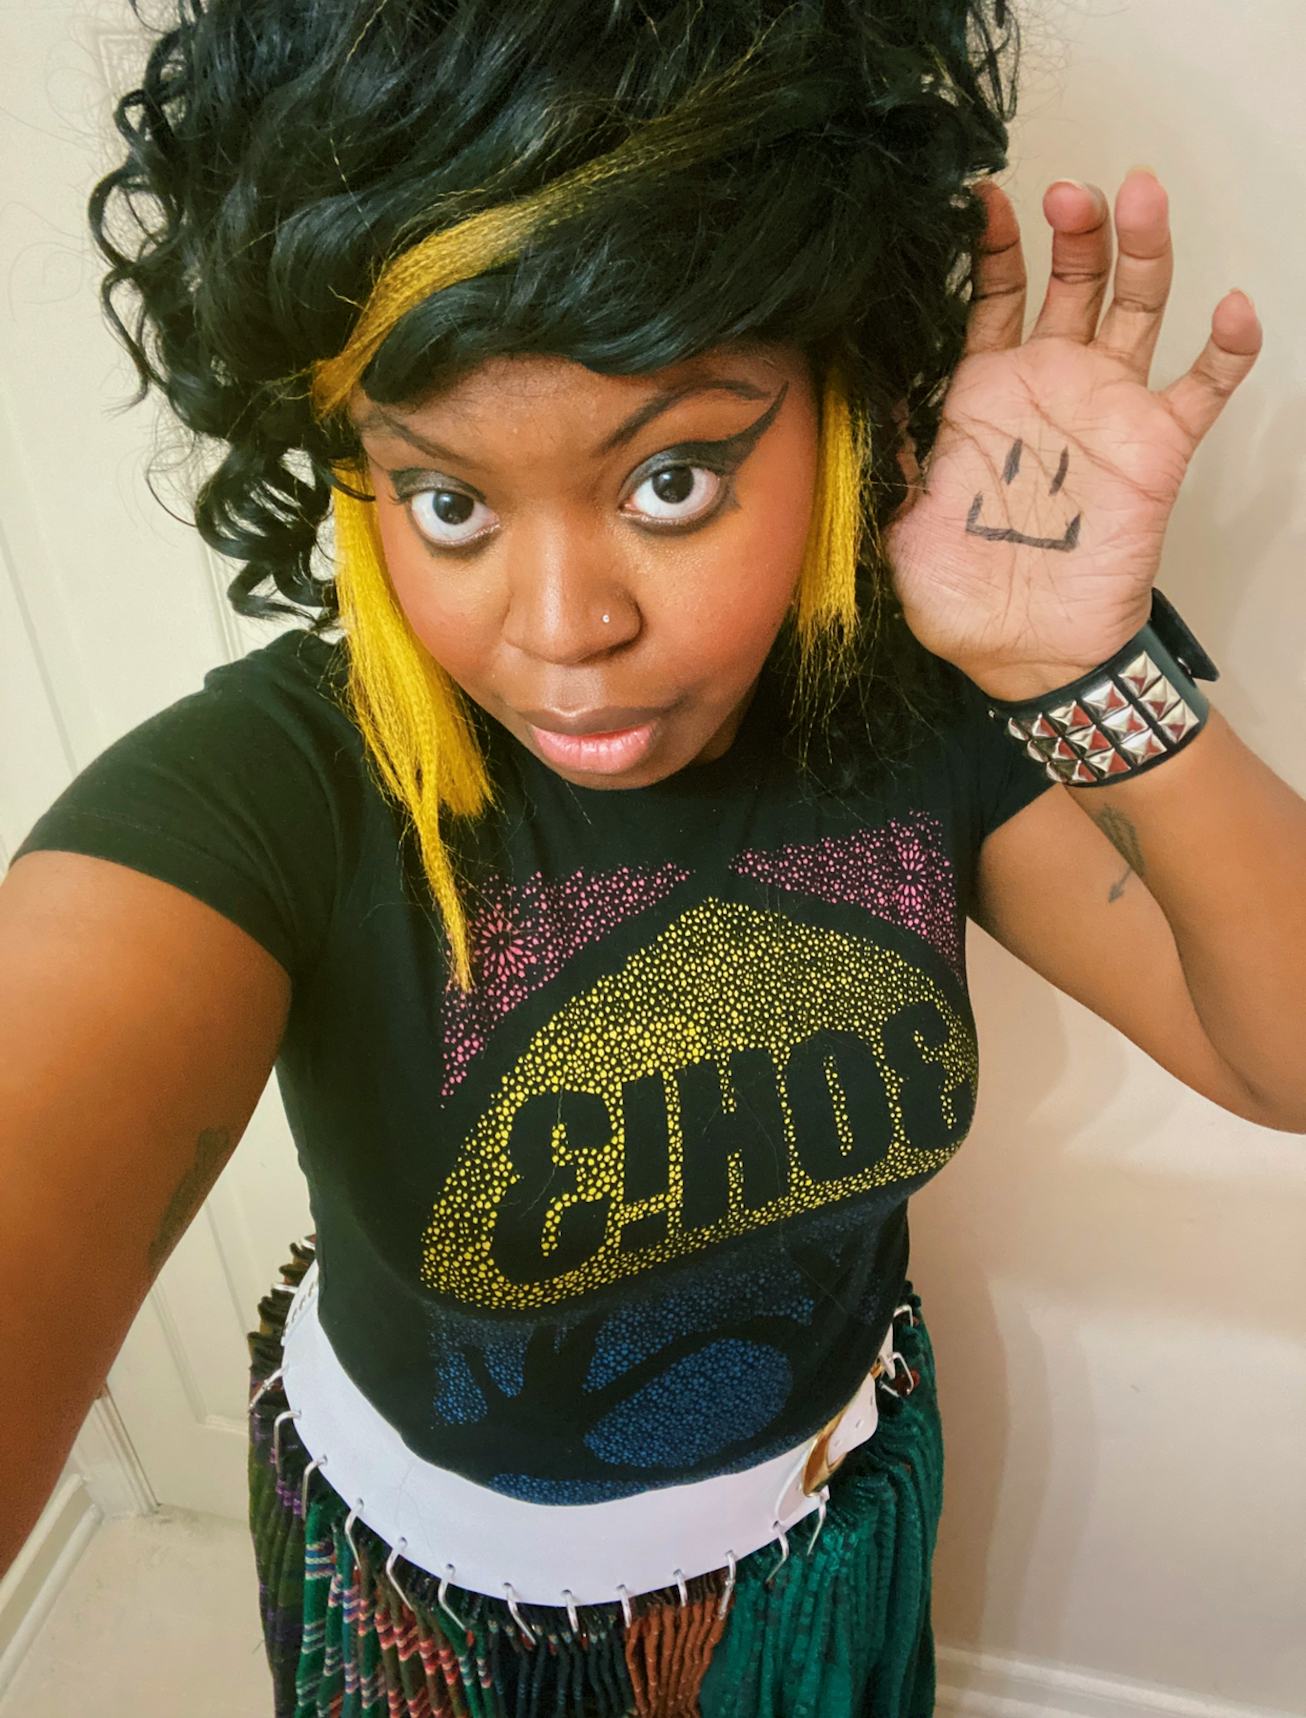 Singer Simpson waving to the camera with a smiley on her hand and yellow streaks in her hair